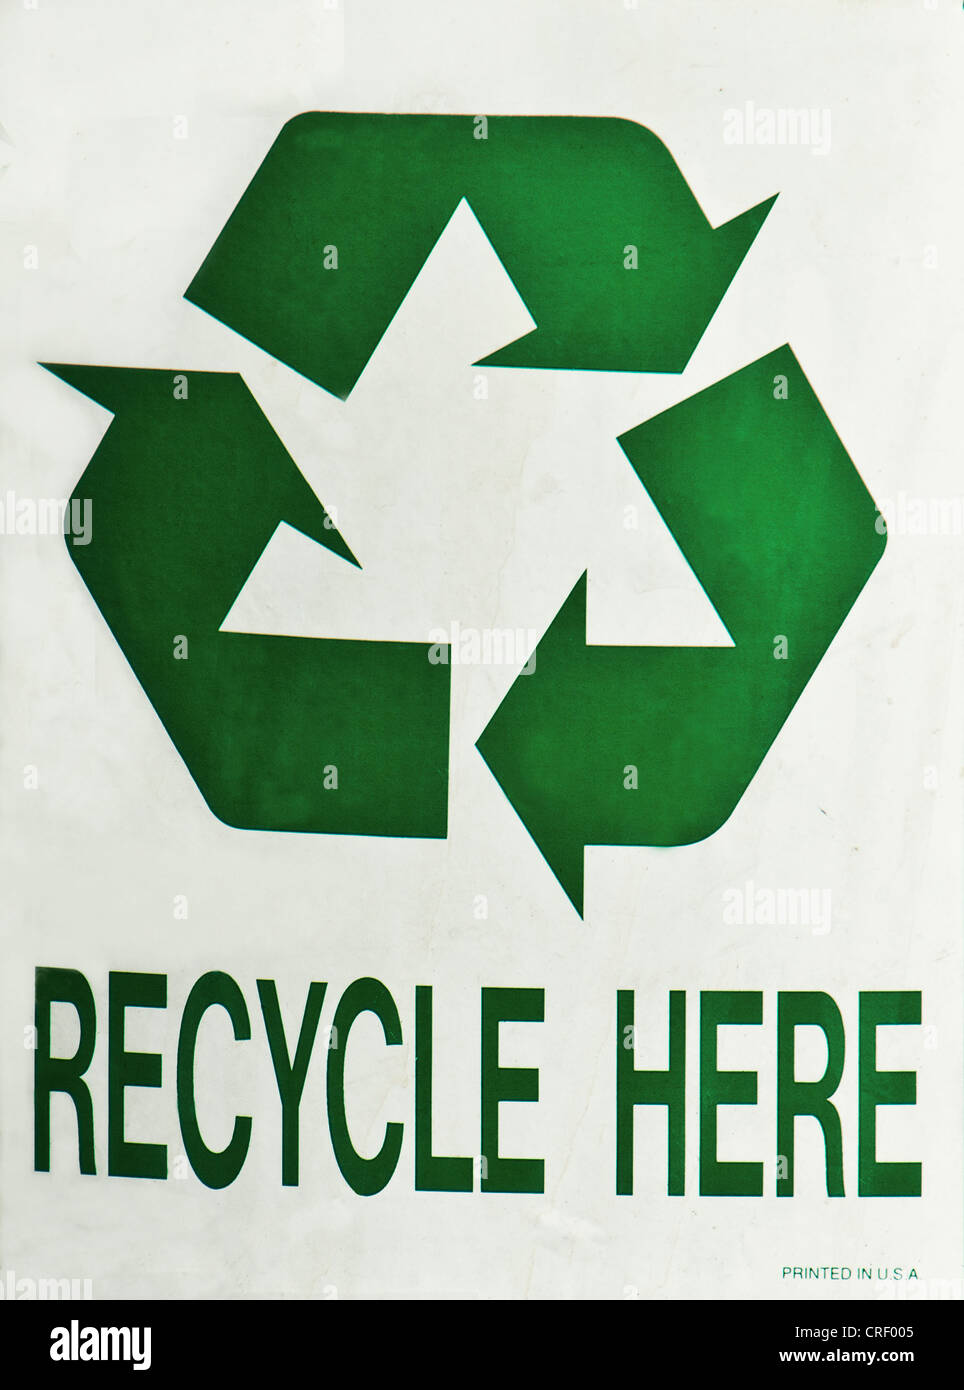 Green recycle here sign on white background Stock Photo